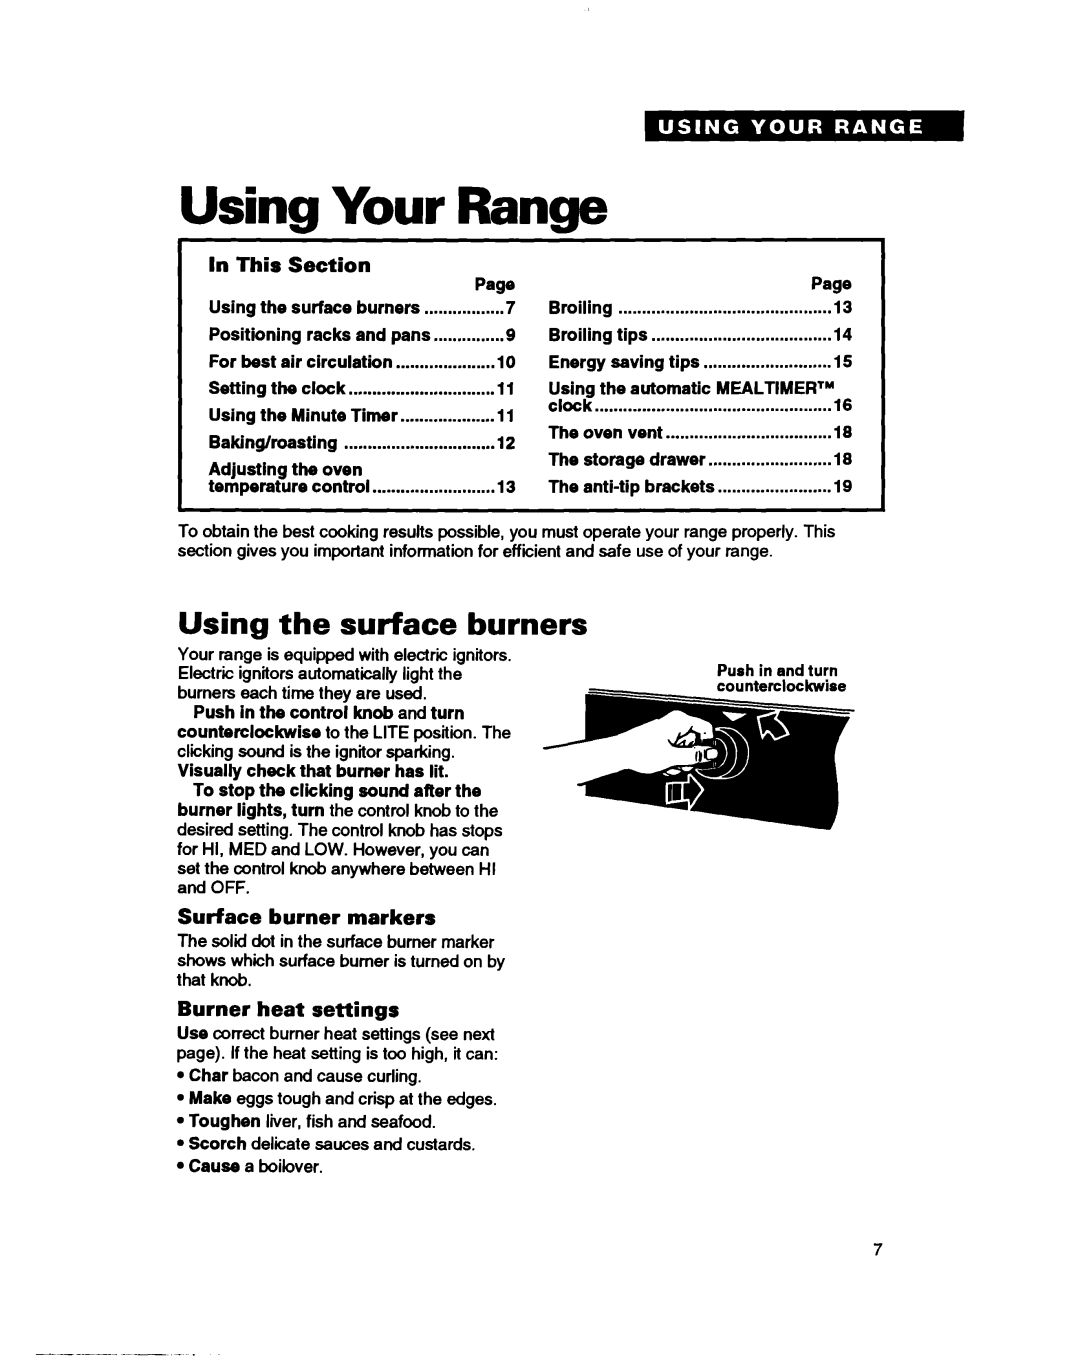 Whirlpool TGR88W2B manual Your, Range, Using the surface burners, In This, Surface burner markers, Burner heat settings 